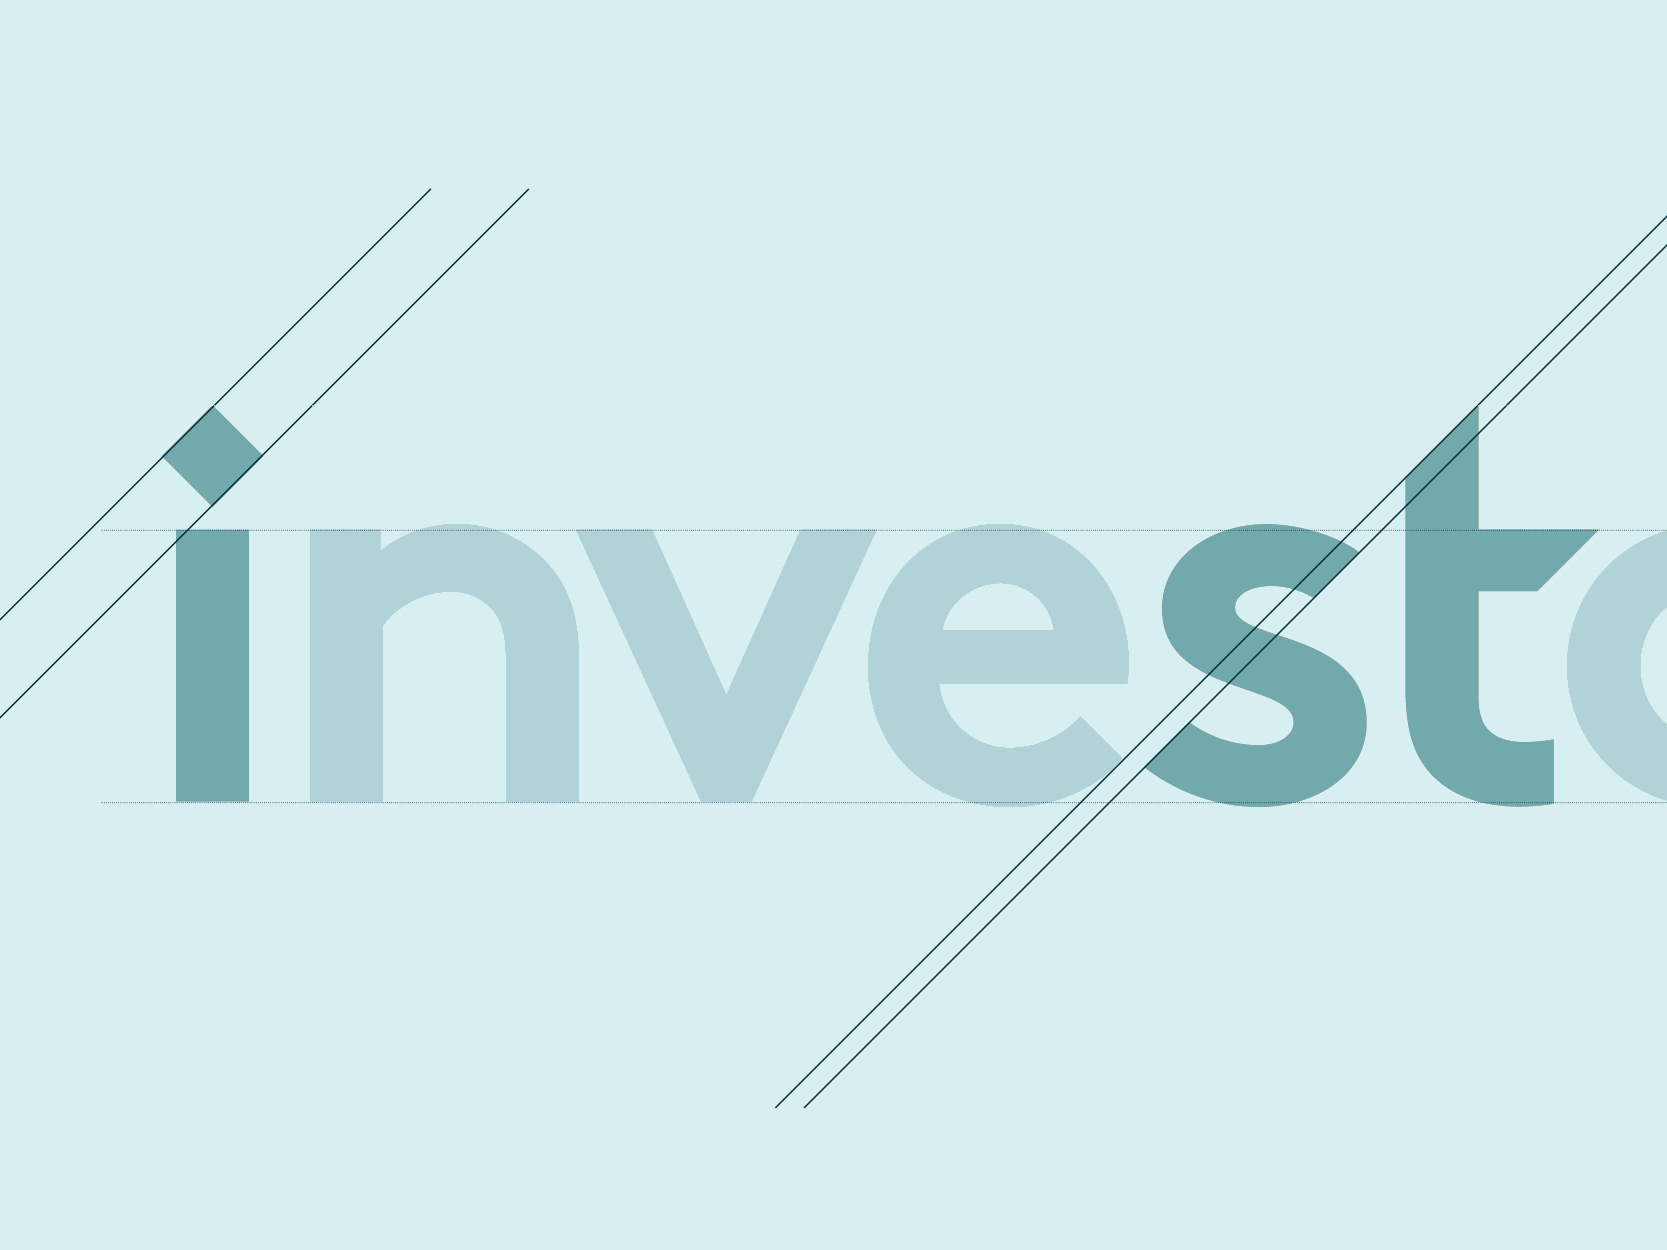 Investore logo showing its visual construction